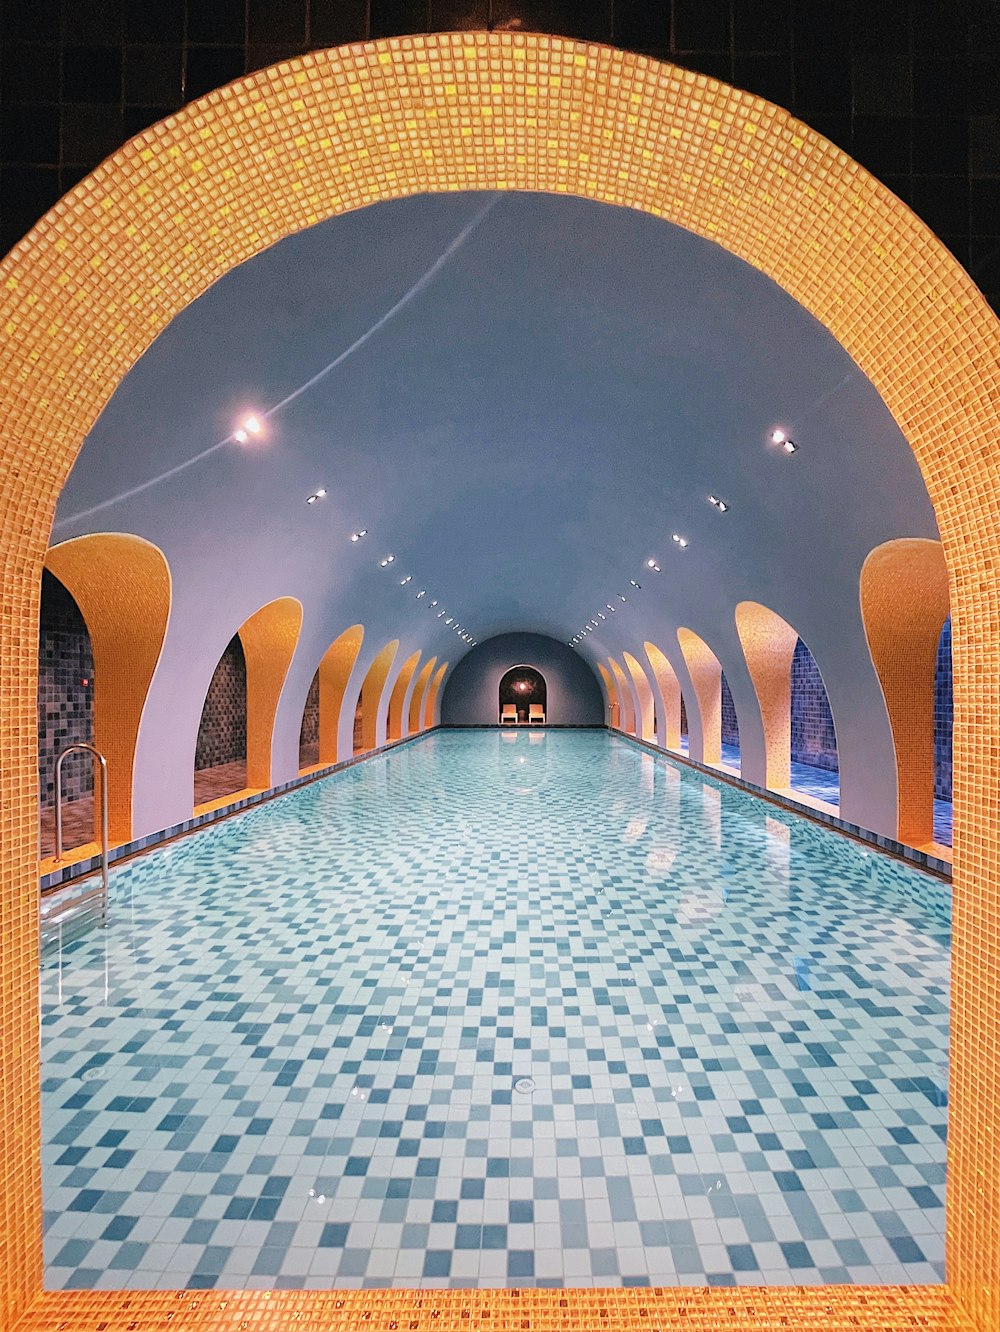 a large swimming pool surrounded by tiled walls